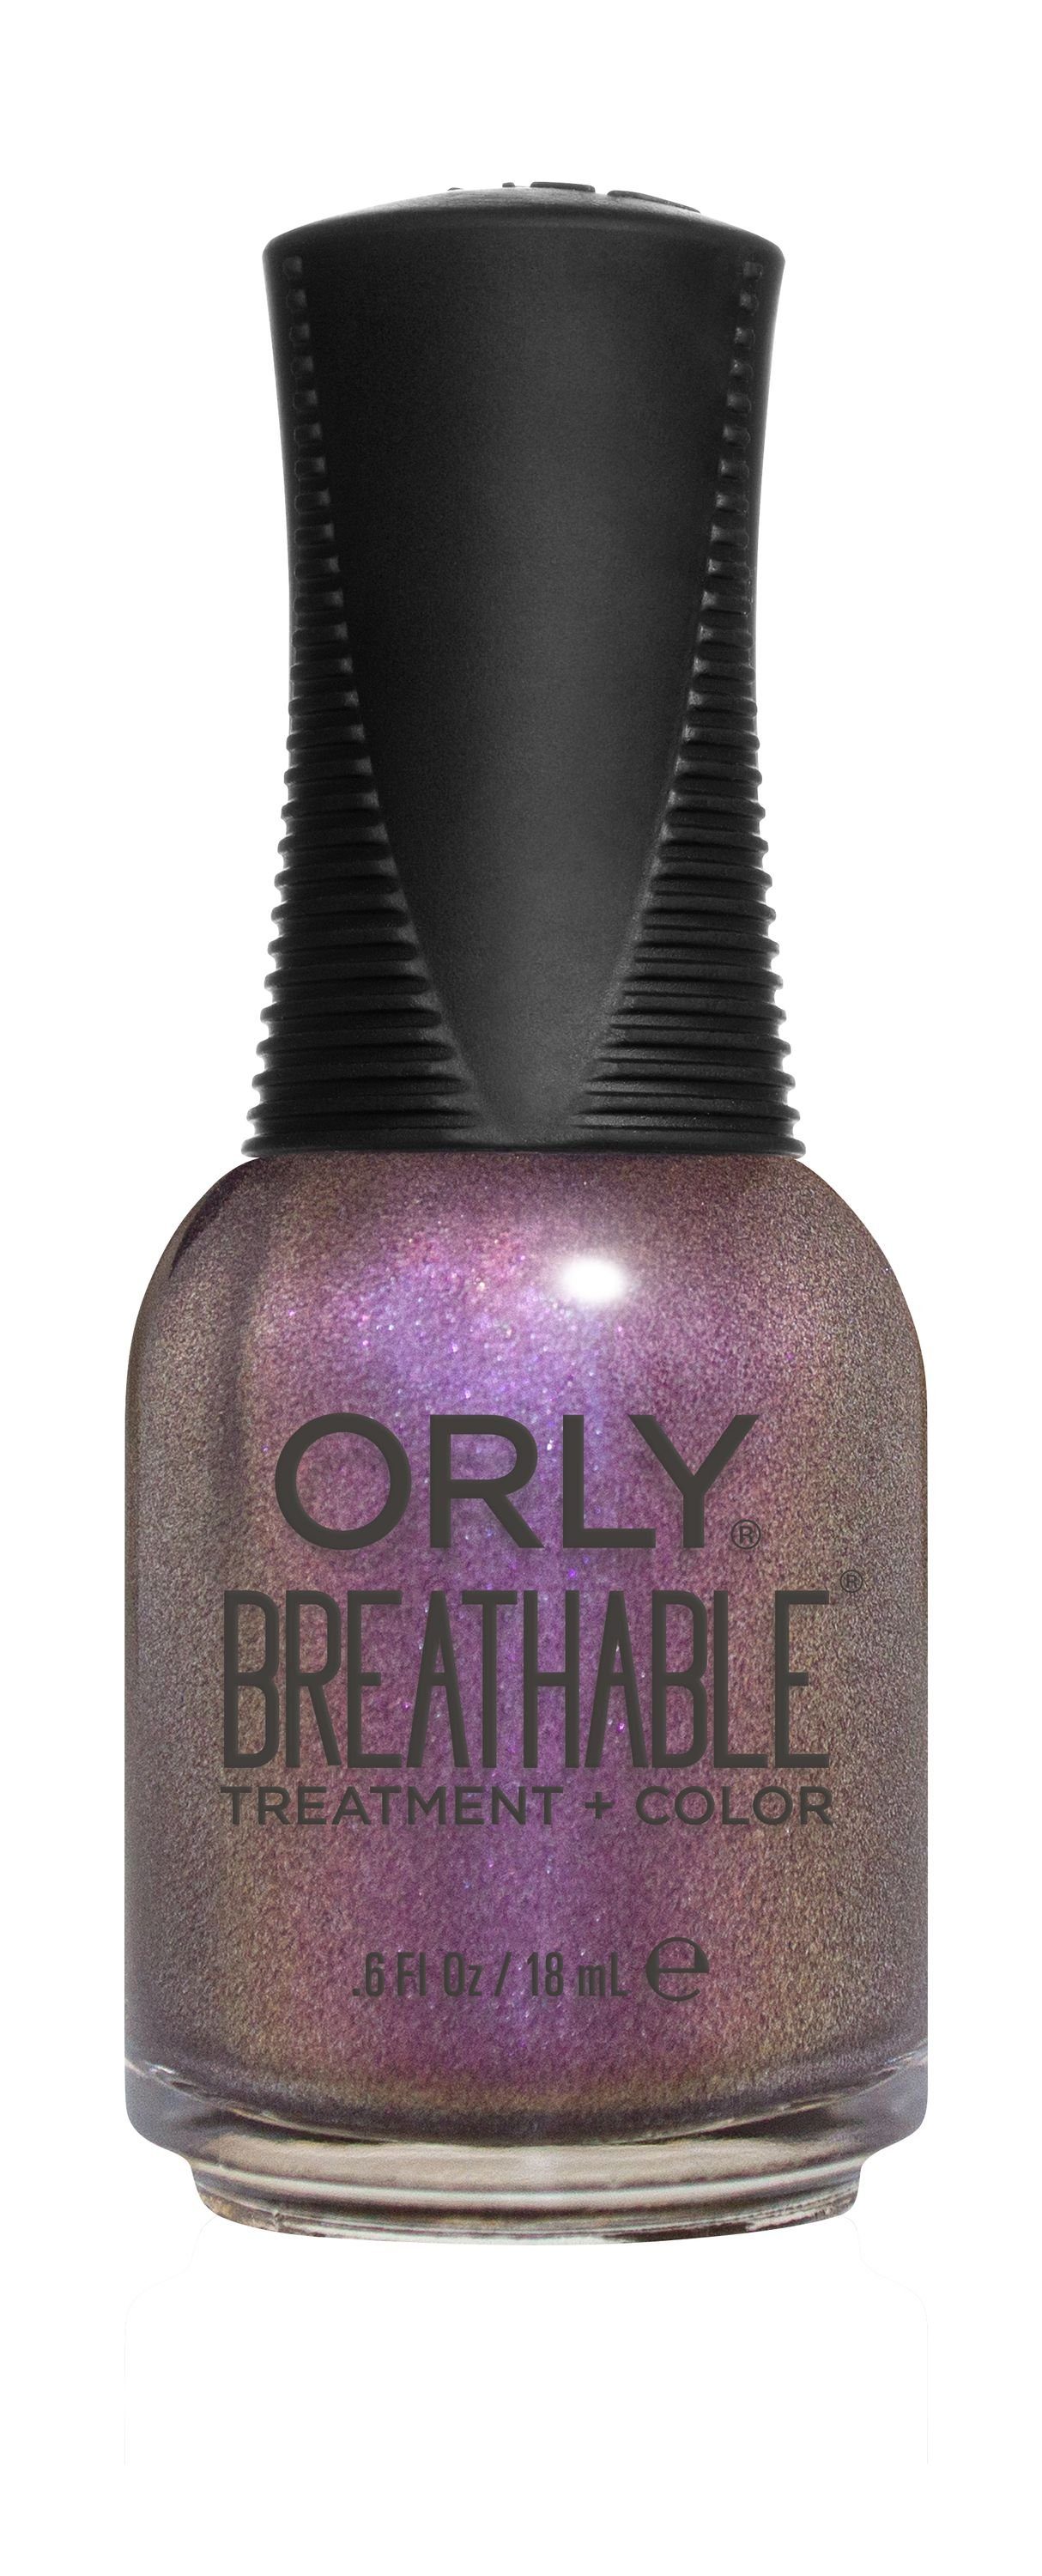 ORLY Nagellack ORLY Breathable - A ML Nagellack Gem, You're 18 